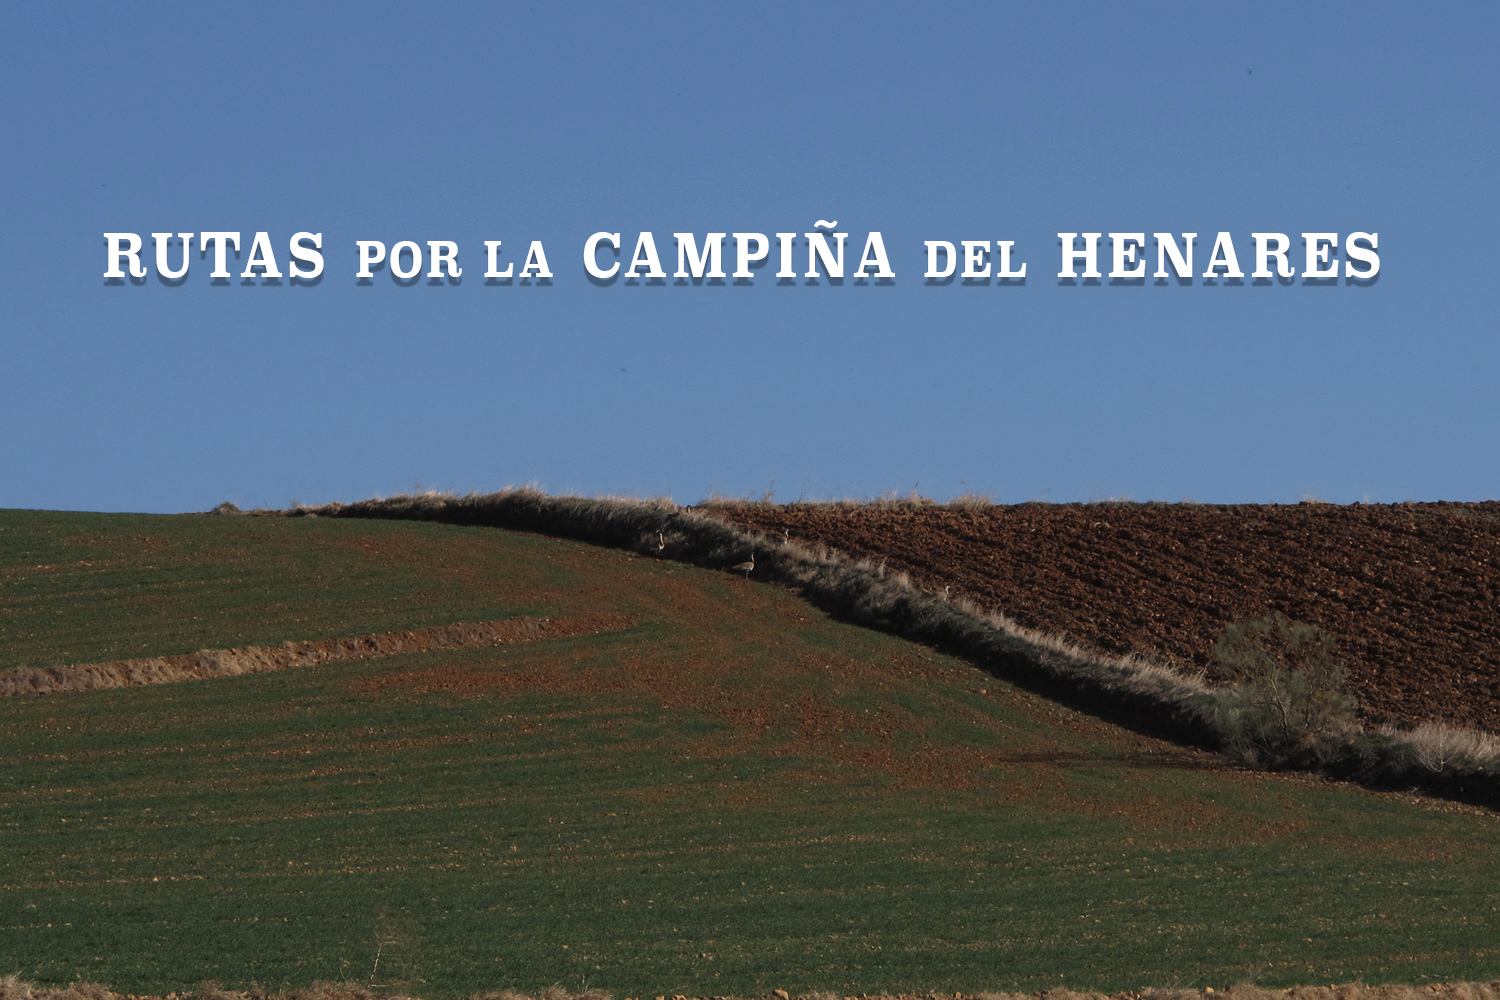 Routes through the countryside of the Henares